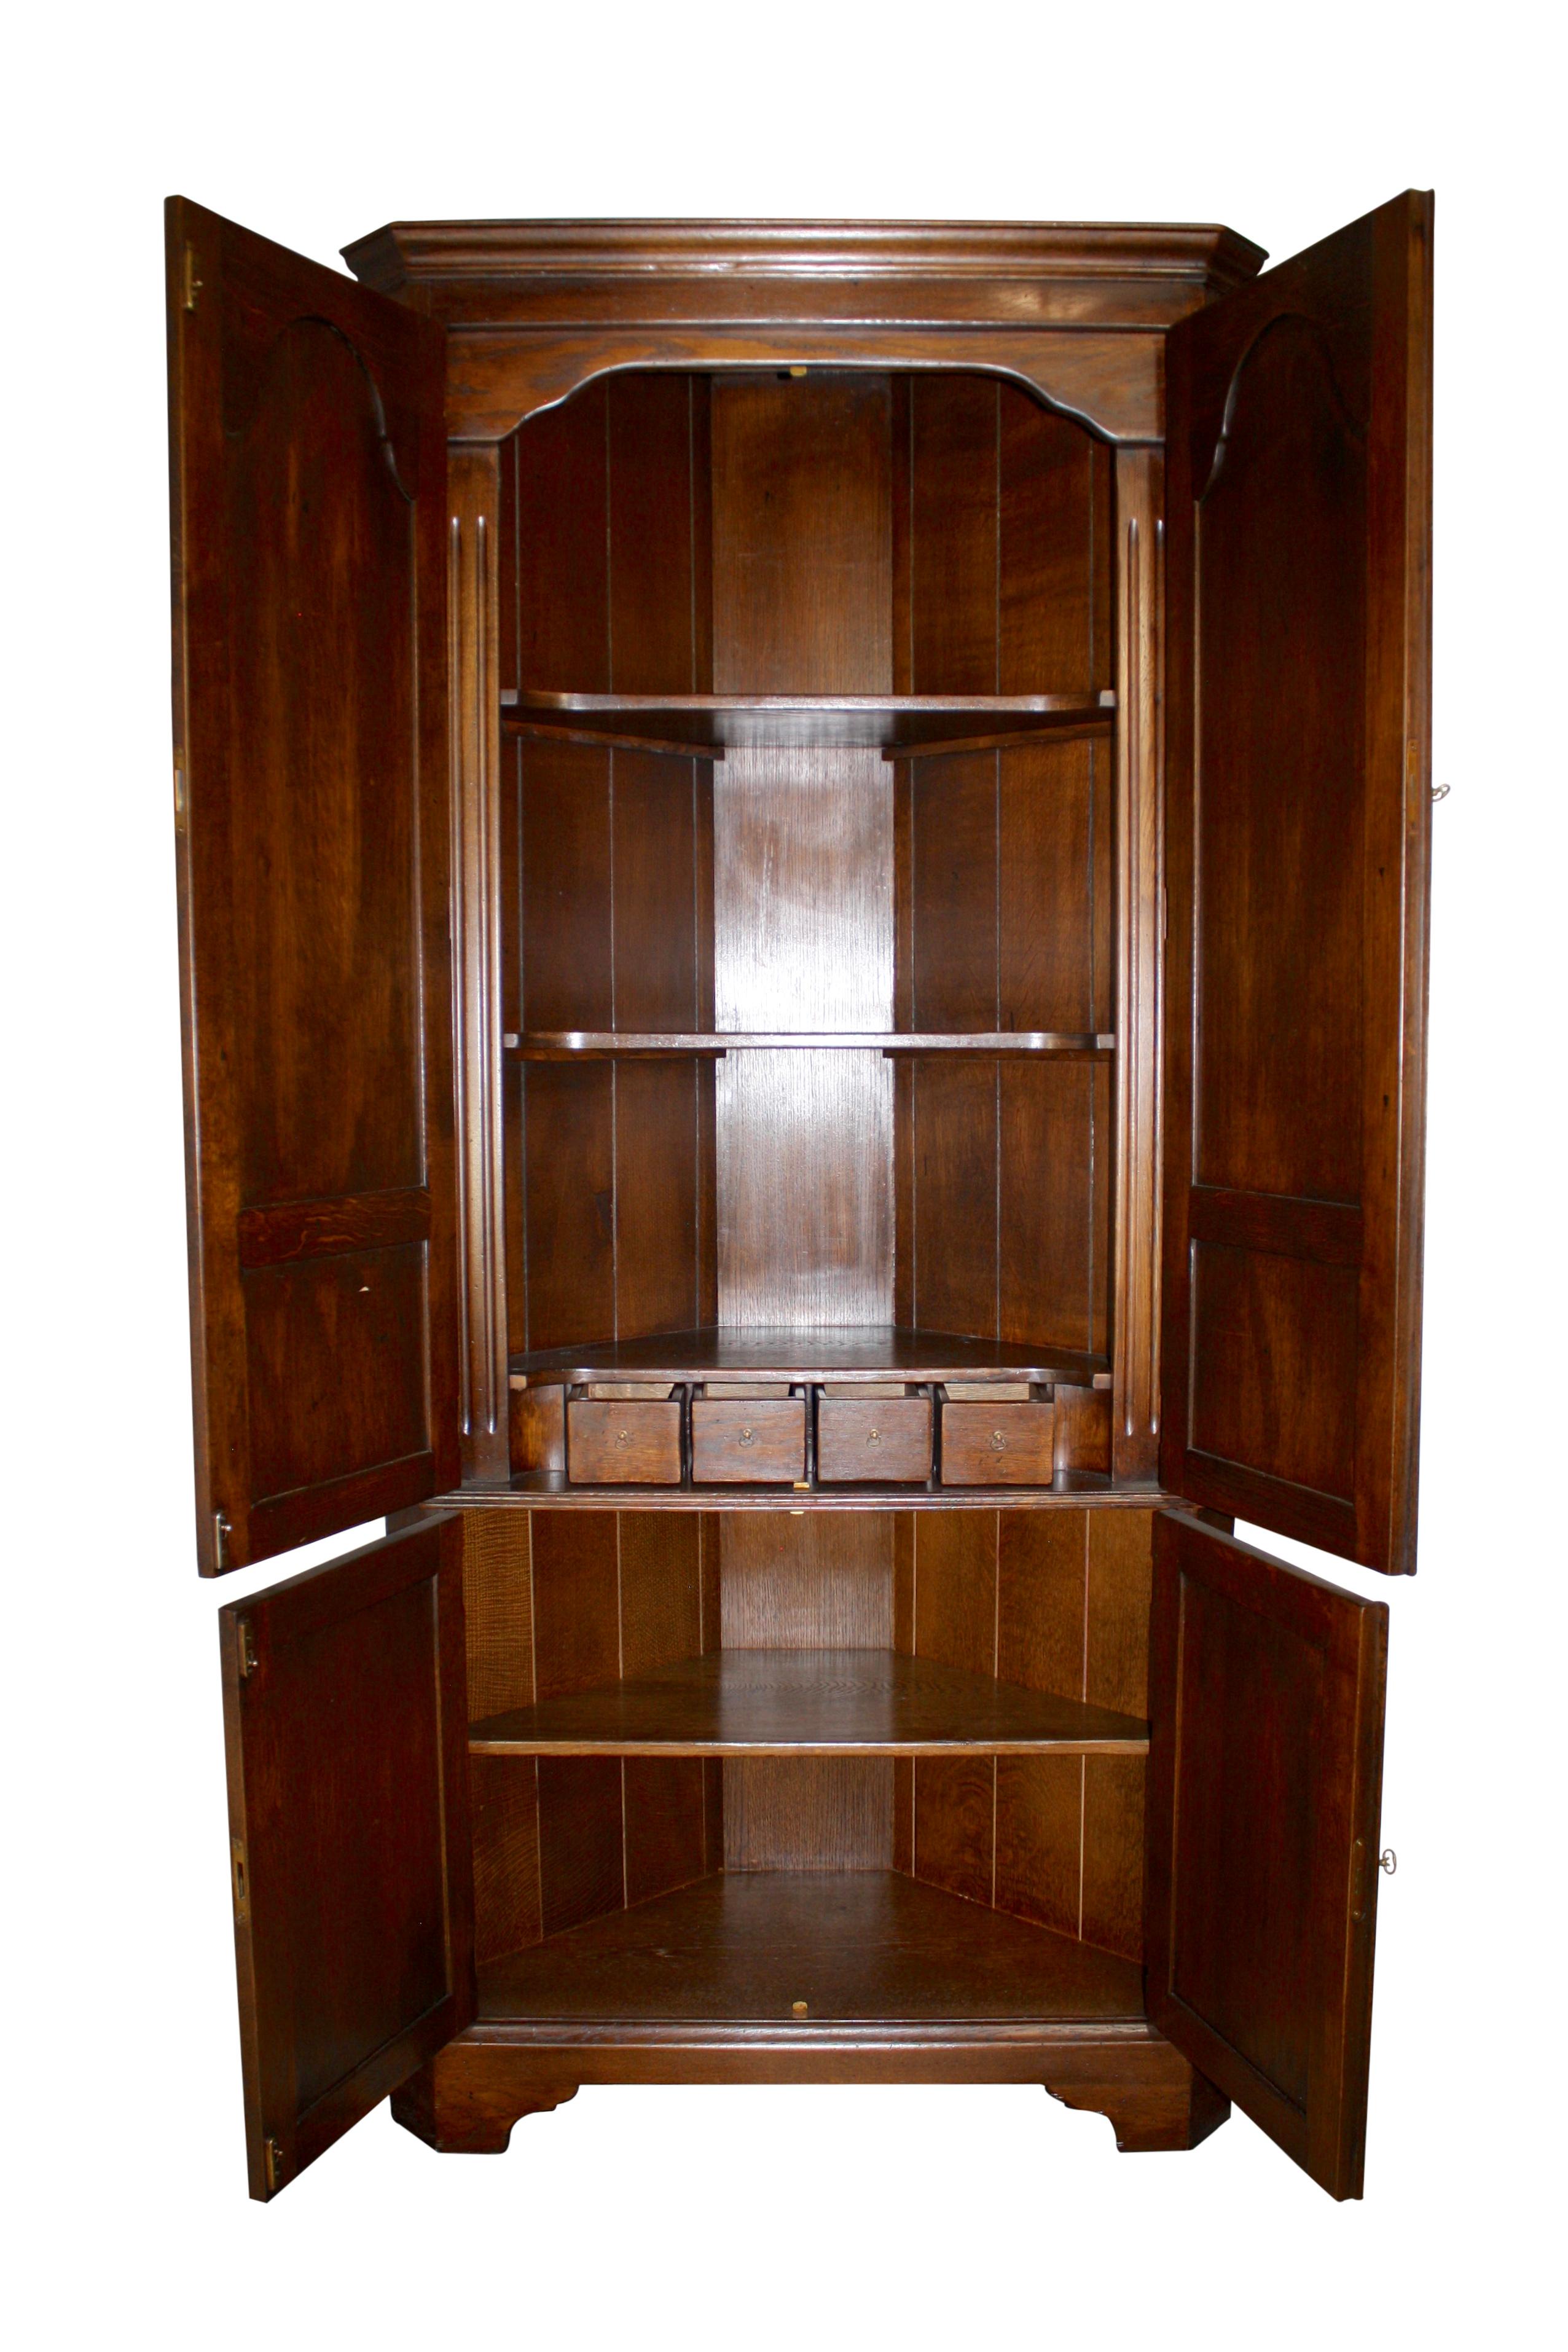 Two sets of doors open to substantial storage in this oak corner cabinet. The top set features tall, cathedral raised panels over small, rectangular raised panels. These doors open to two shelves and four small drawers with ring pulls. The bottom